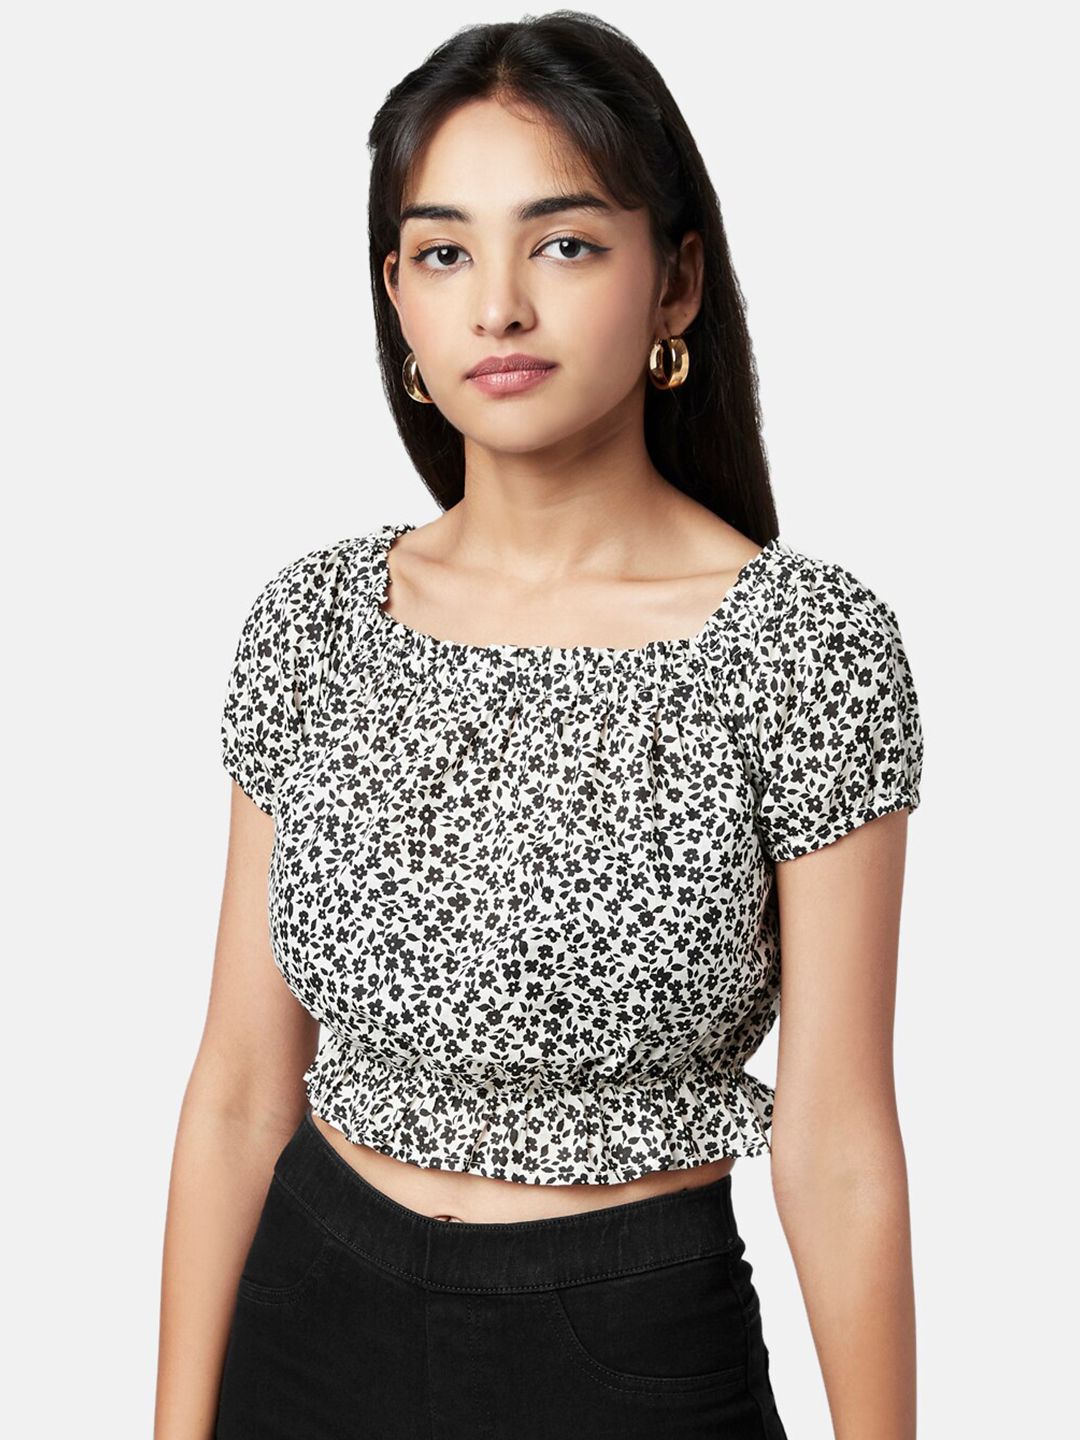 YU by Pantaloons White Floral Print Blouson Crop Top Price in India